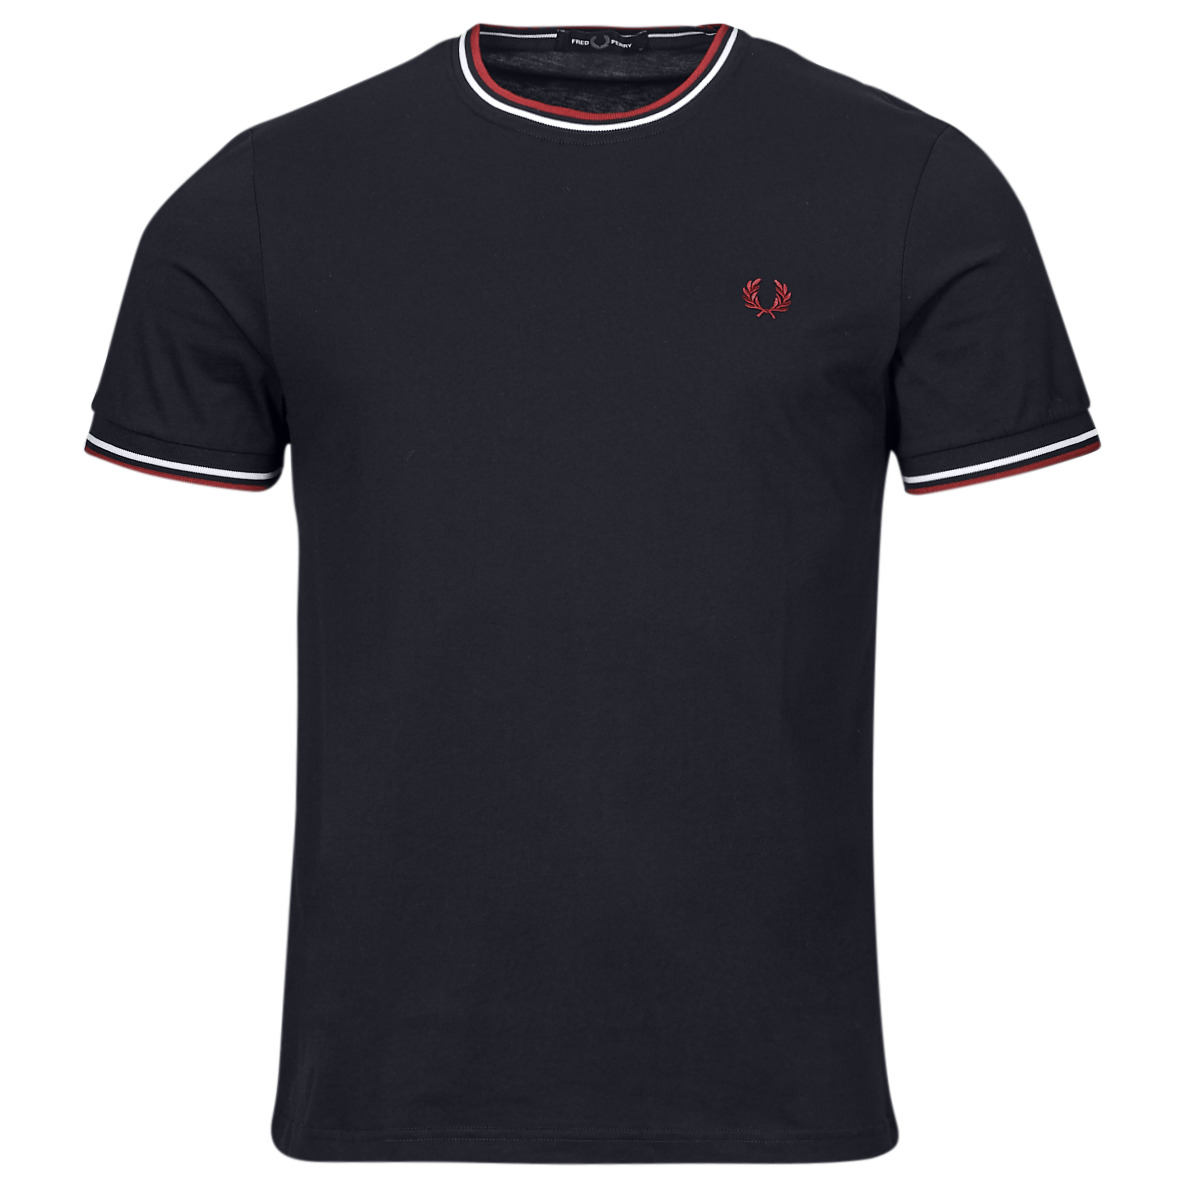 Kleidung Herren T-Shirts Fred Perry TWIN TIPPED T-SHIRT Marine